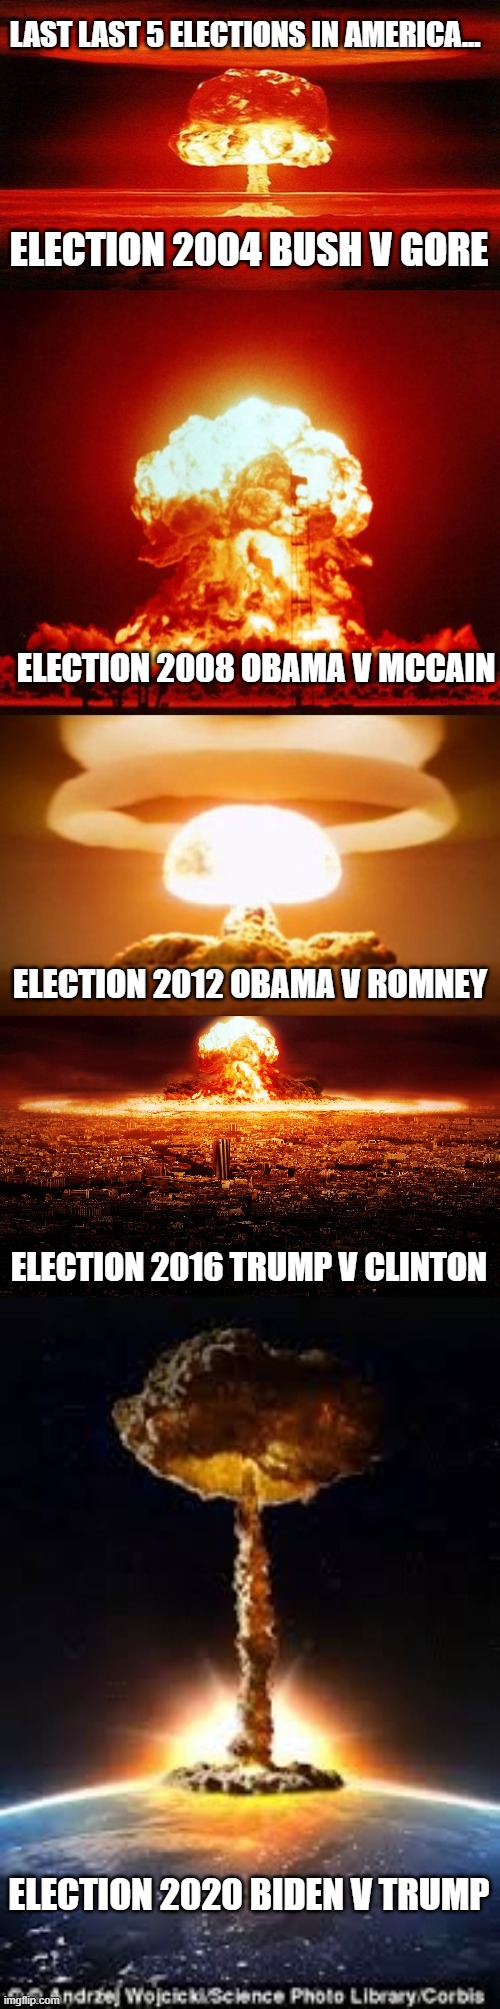 Political tension in America over elections. | LAST LAST 5 ELECTIONS IN AMERICA... ELECTION 2004 BUSH V GORE; ELECTION 2008 OBAMA V MCCAIN; ELECTION 2012 OBAMA V ROMNEY; ELECTION 2016 TRUMP V CLINTON; ELECTION 2020 BIDEN V TRUMP | image tagged in nuclear bomb mind blown,nuke,nuclear explosion,massive nuclear explosion destroying city,too much hydrogen | made w/ Imgflip meme maker